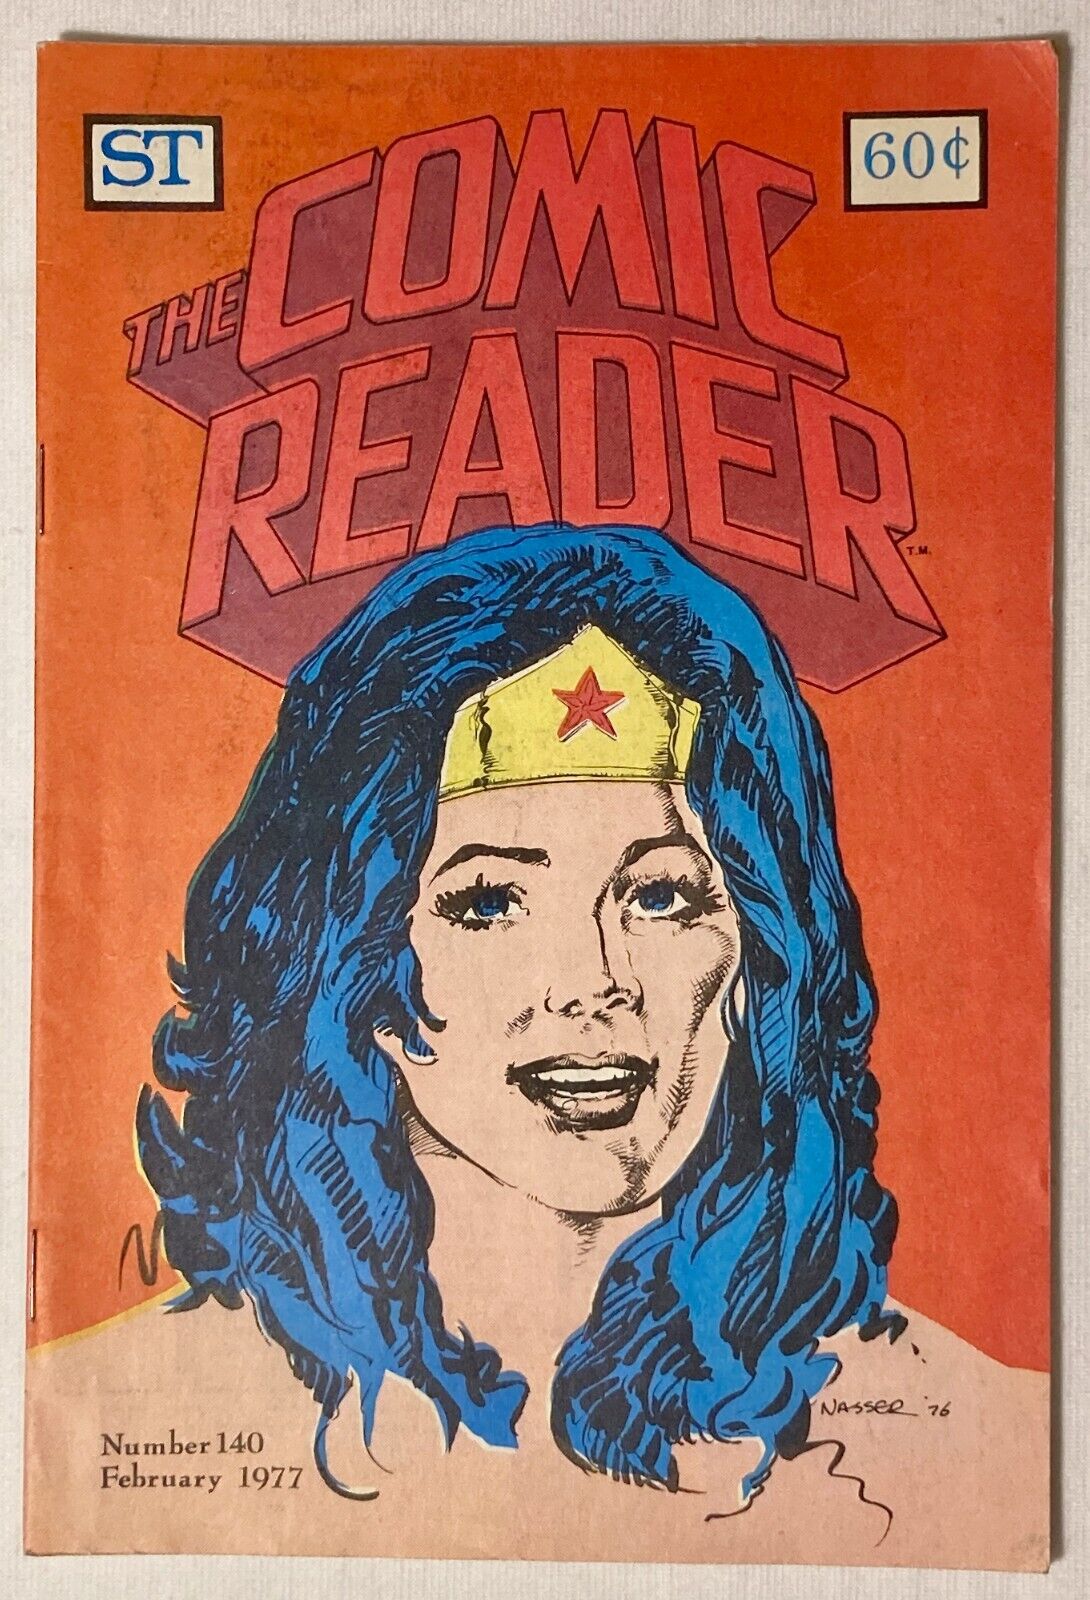 The Comic Reader #140 -- February 1977 - Mike Nassar Wonder Woman Cover